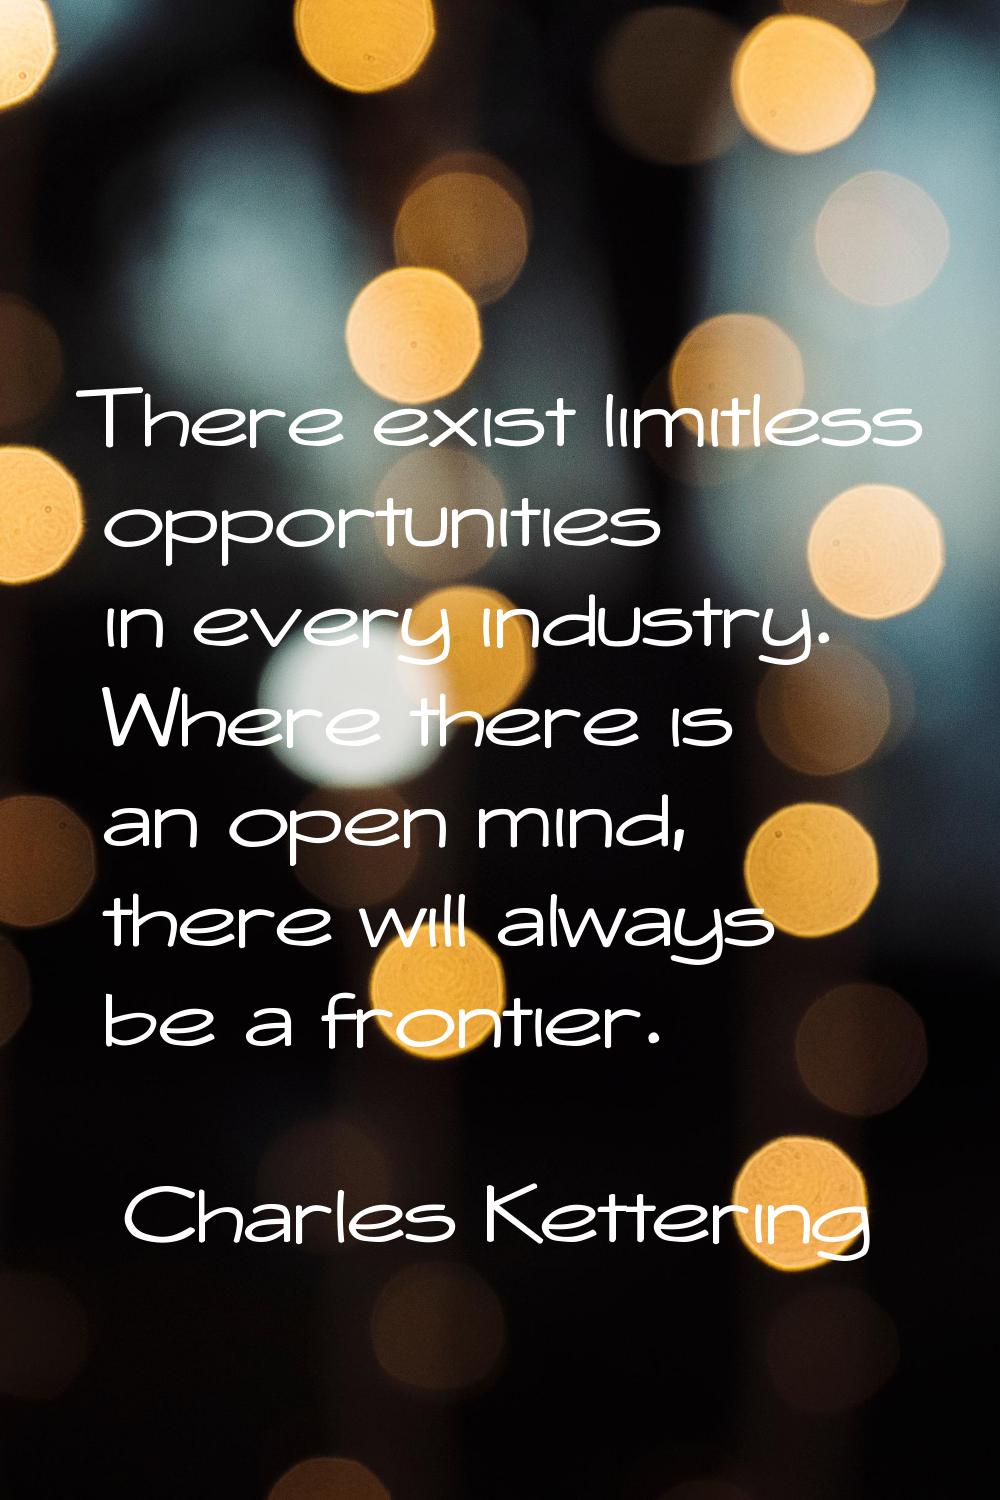 There exist limitless opportunities in every industry. Where there is an open mind, there will alwa